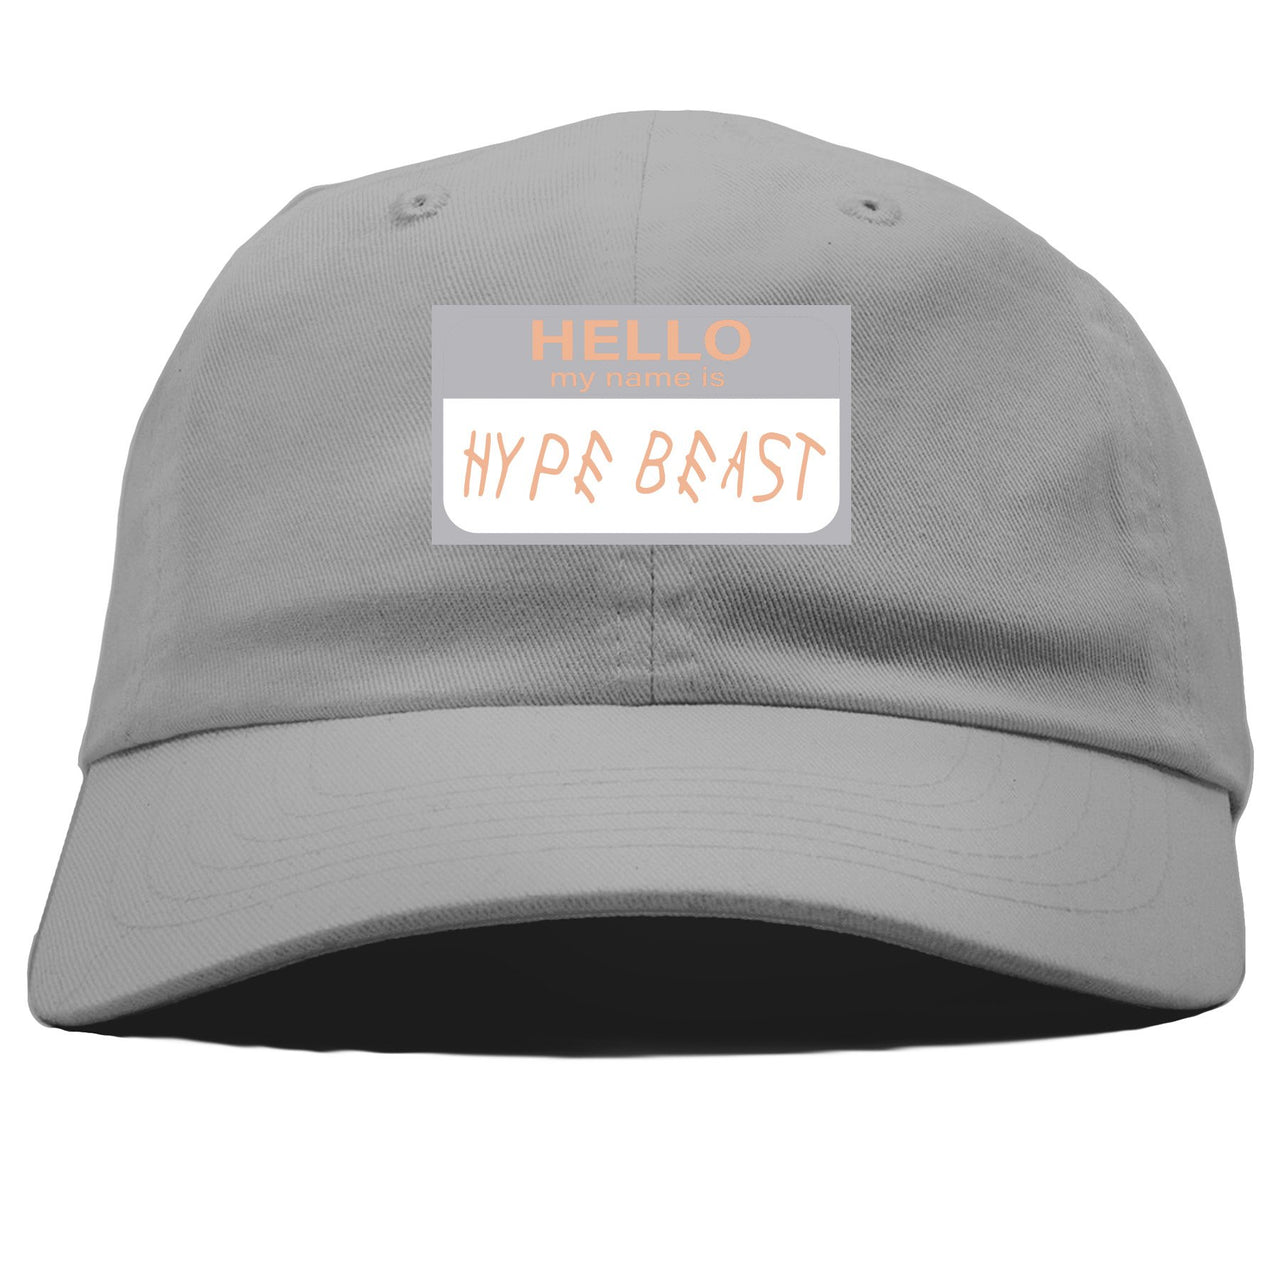 True Form v2 350s Dad Hat | Hello My Name Is Hype Beast Woe, Light Gray